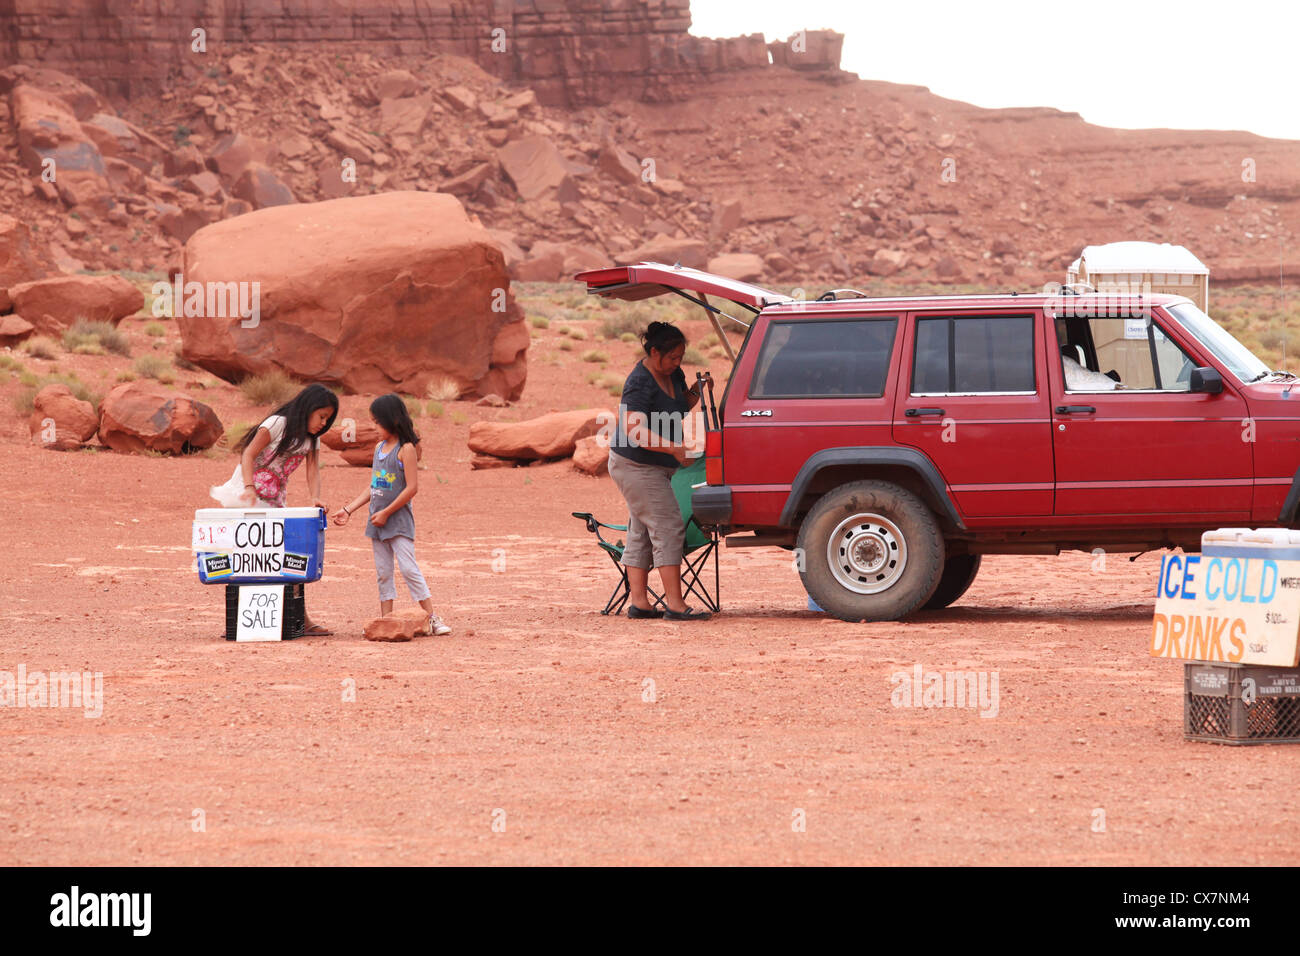 Native Navajo Indian family packing up trading goods advent approaching thunderstorm in Monument valley, Arizona, US Stock Photo